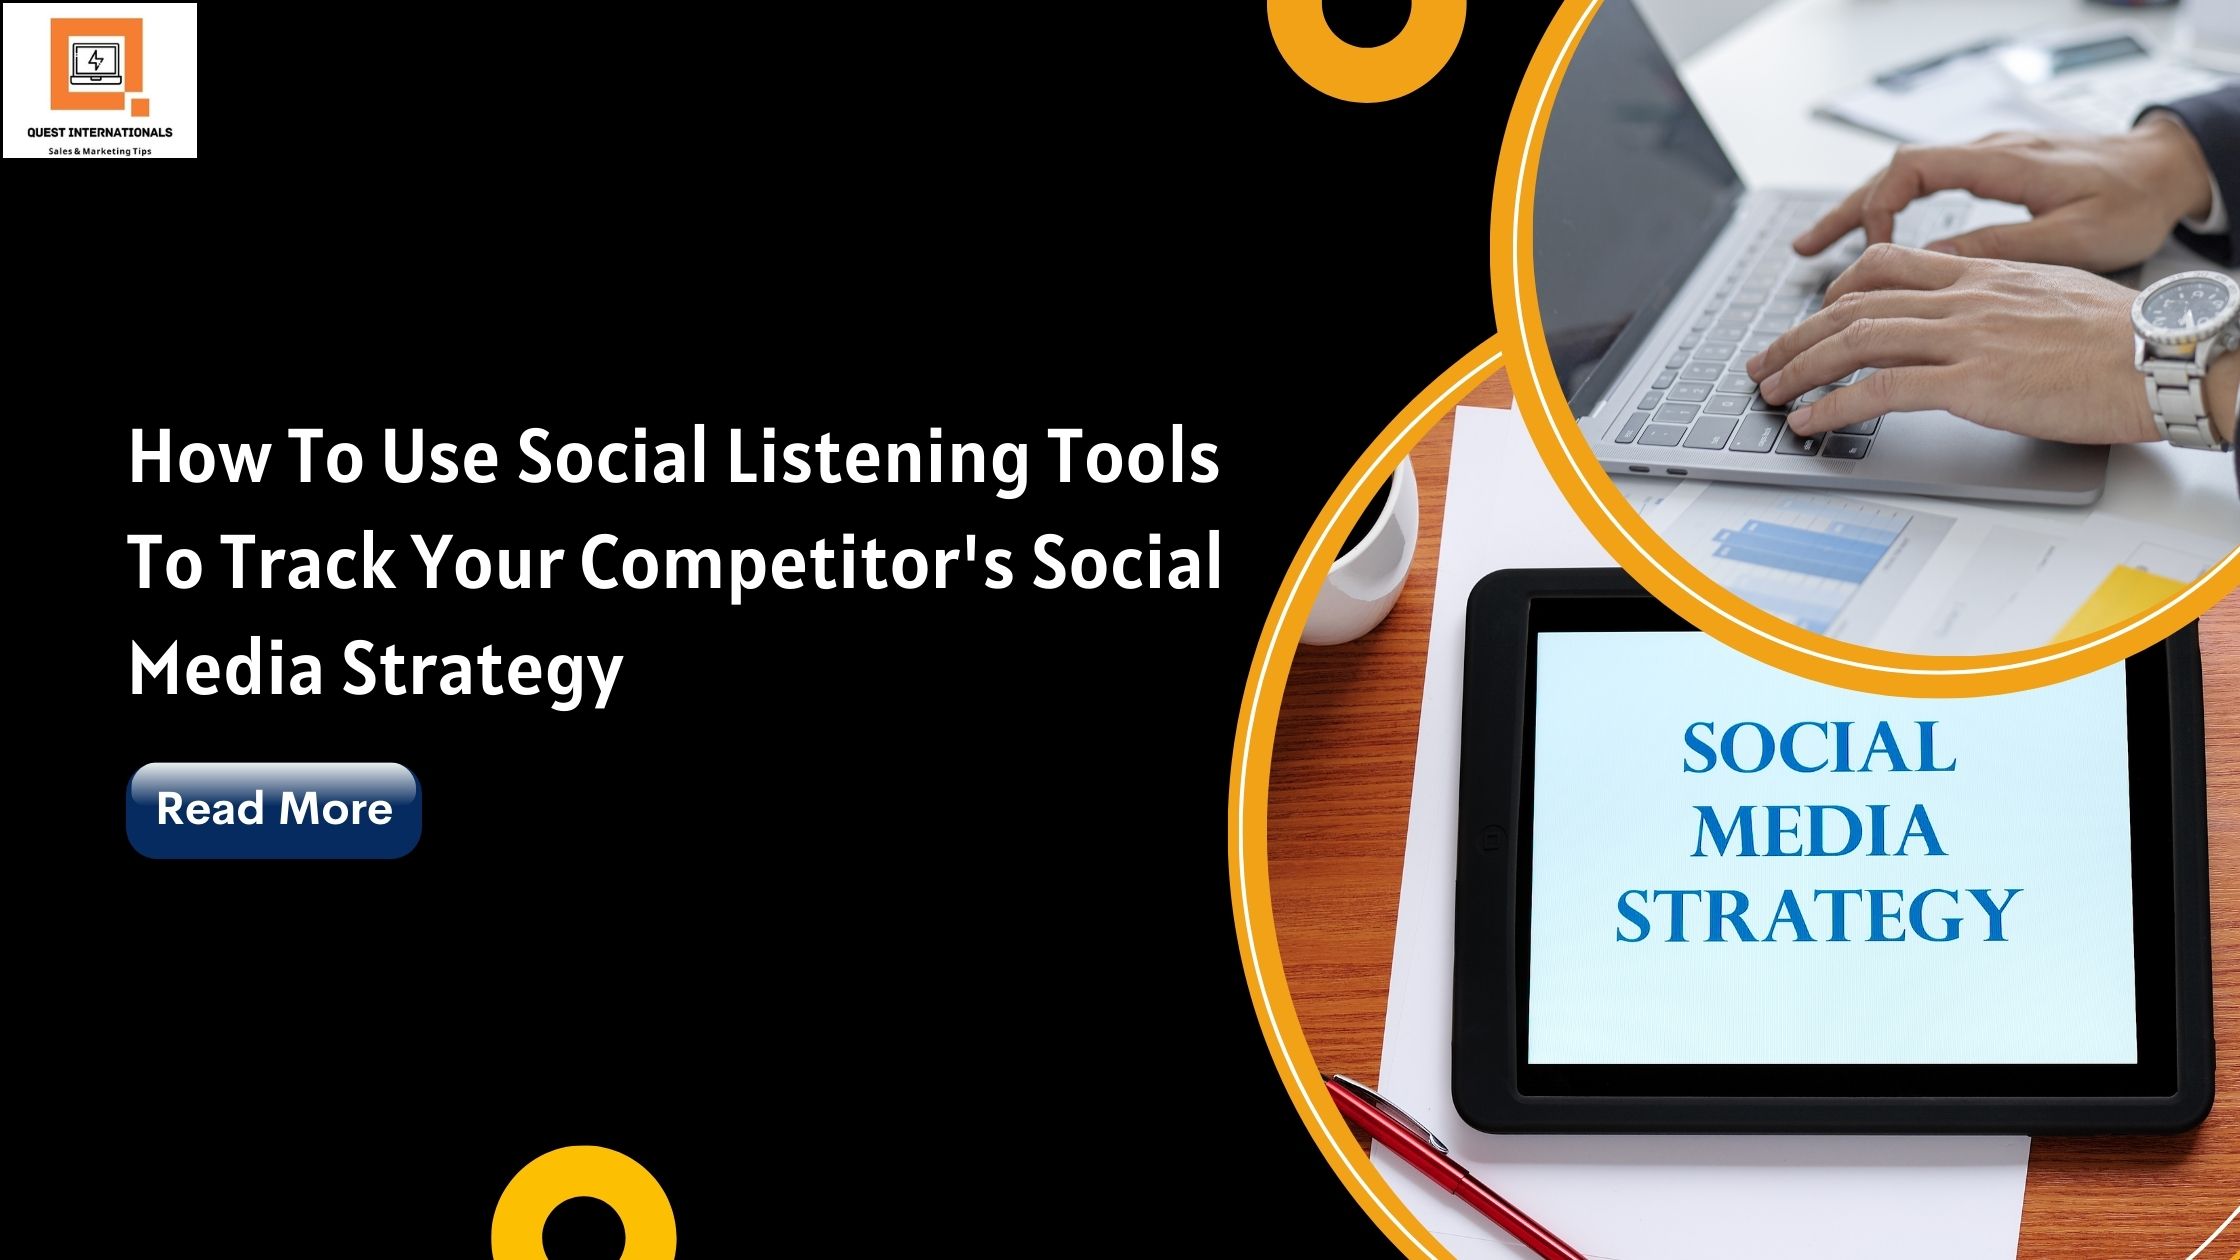 You are currently viewing How To Use Social Listening Tools To Track Your Competitor’s Social Media Strategy